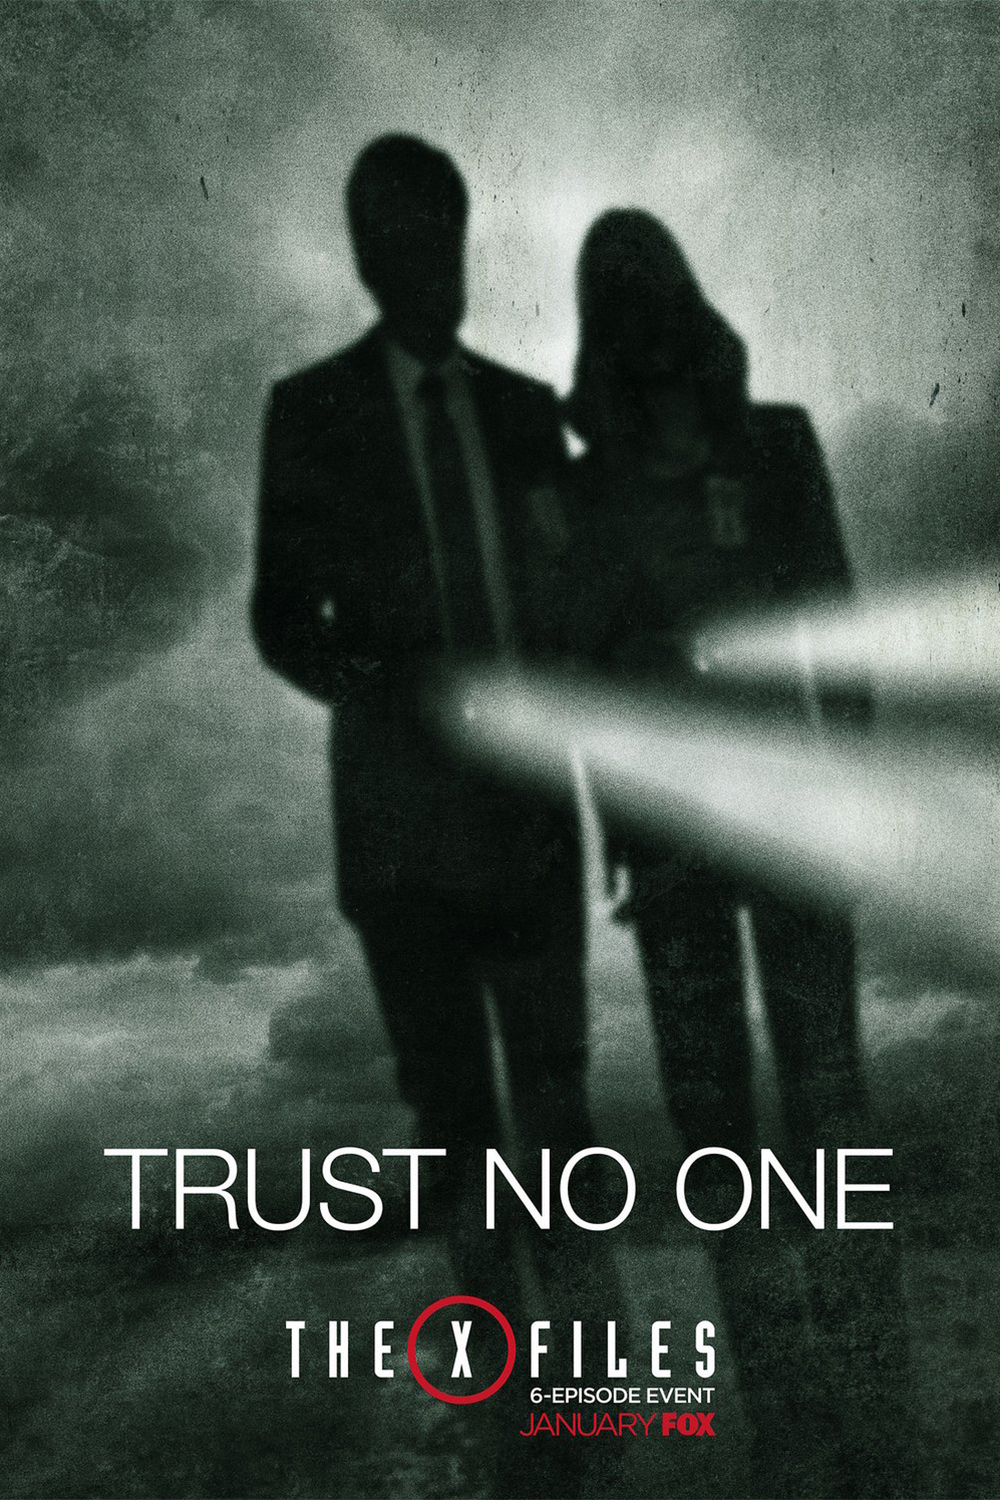 The X-files Revival Posters - X Files Don T Trust Anyone - HD Wallpaper 